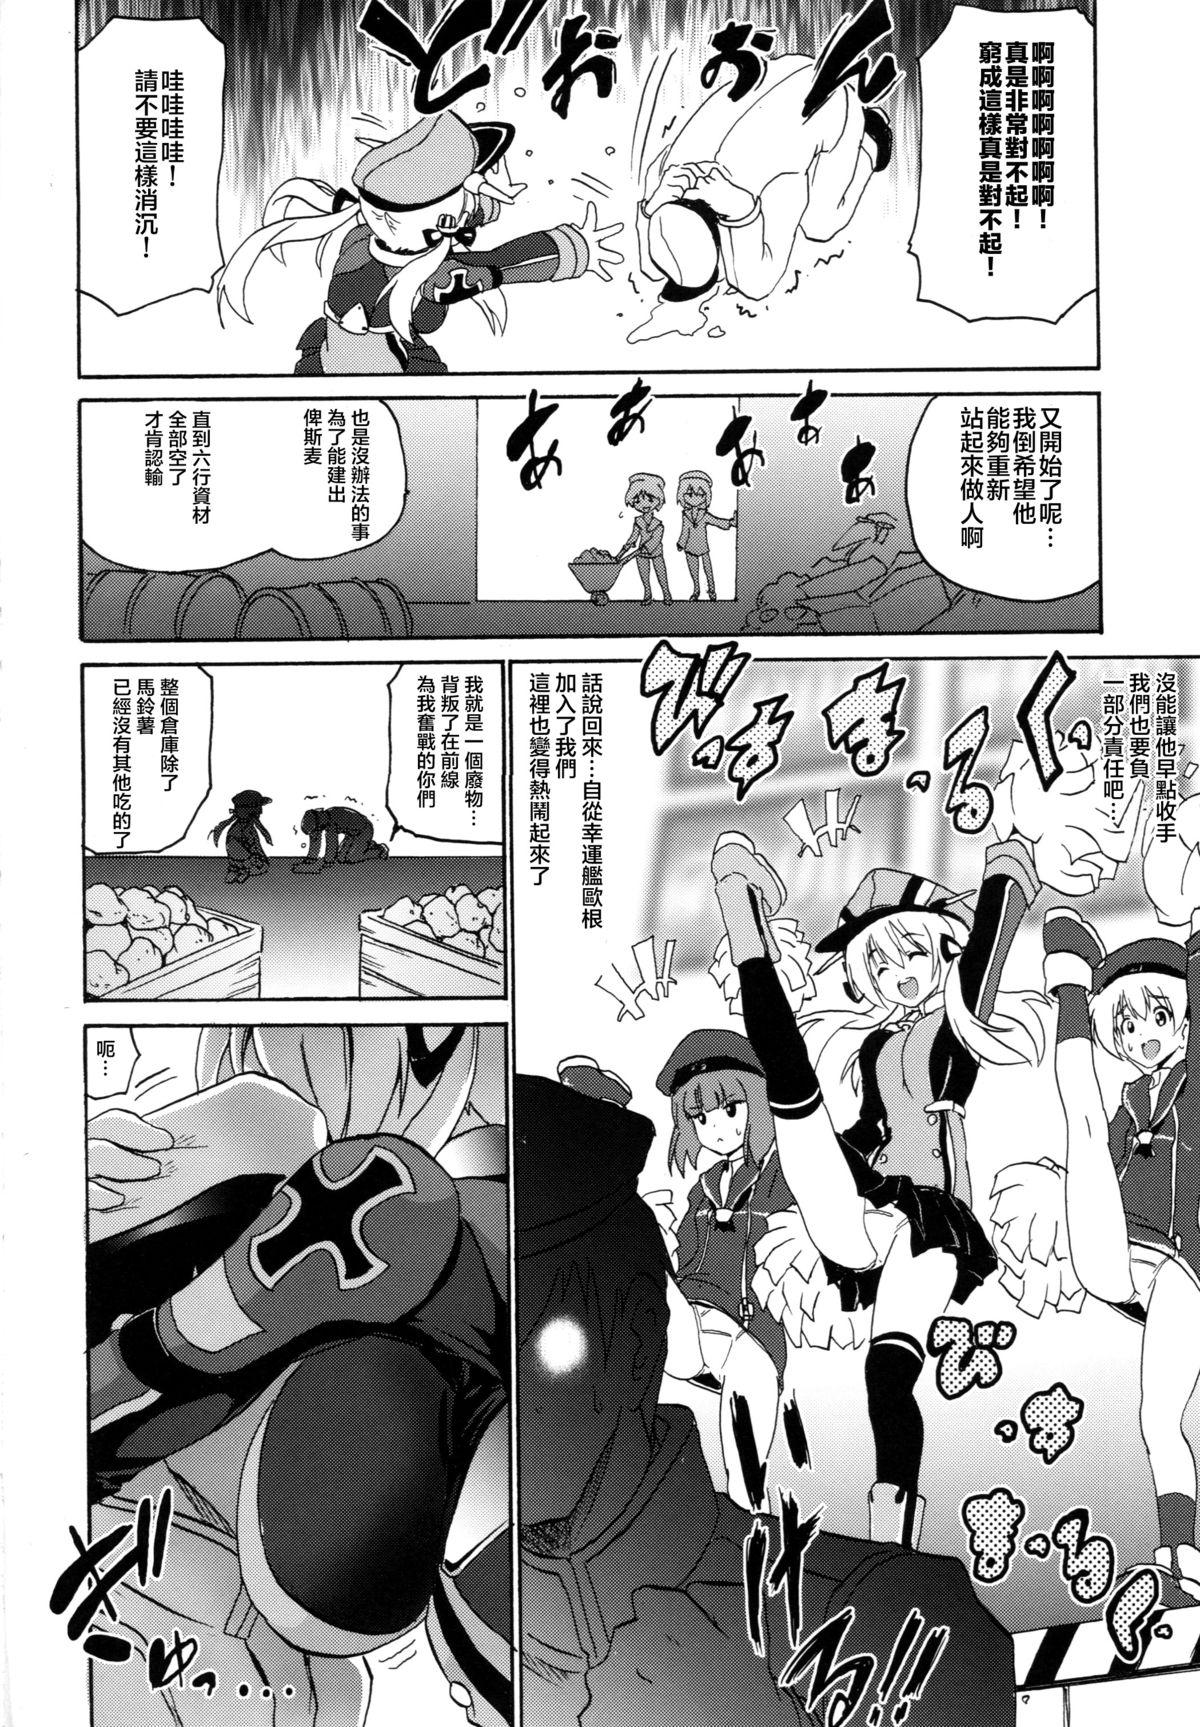 Tgirl OVER HEAT GEYSER - Kantai collection Groupsex - Page 4